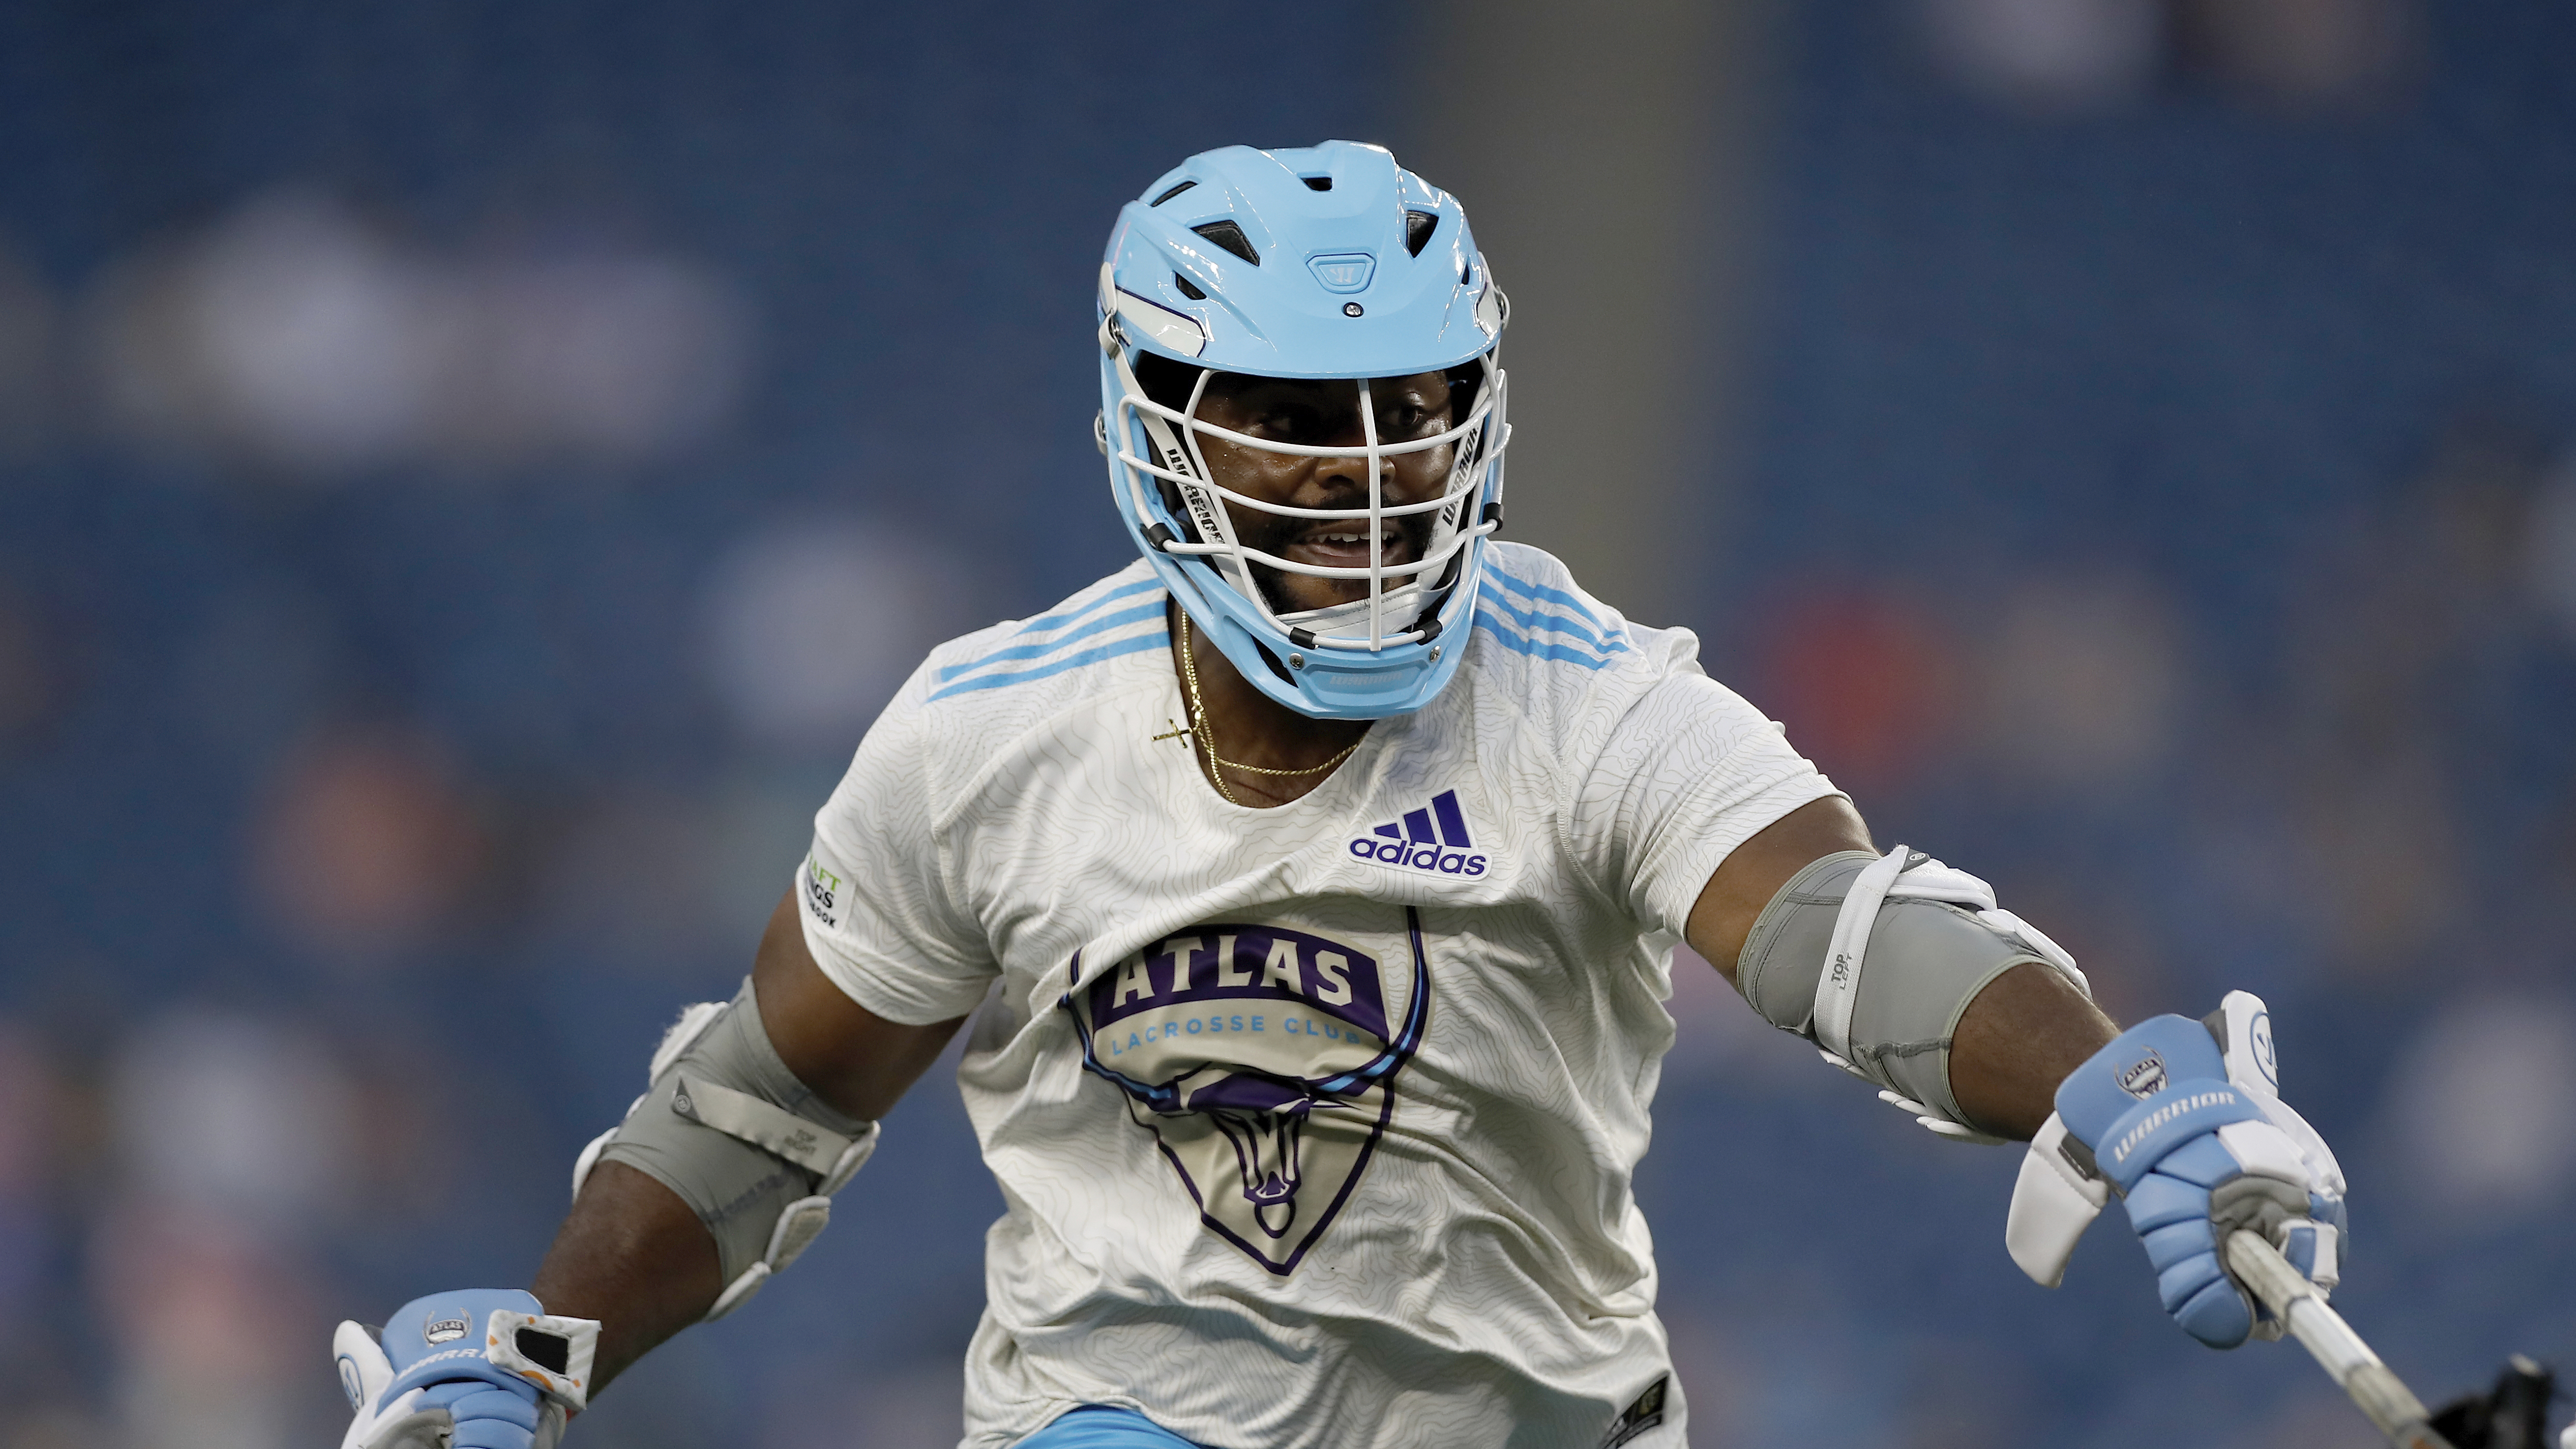 The Premier Lacrosse League Is Trying To Change The Game